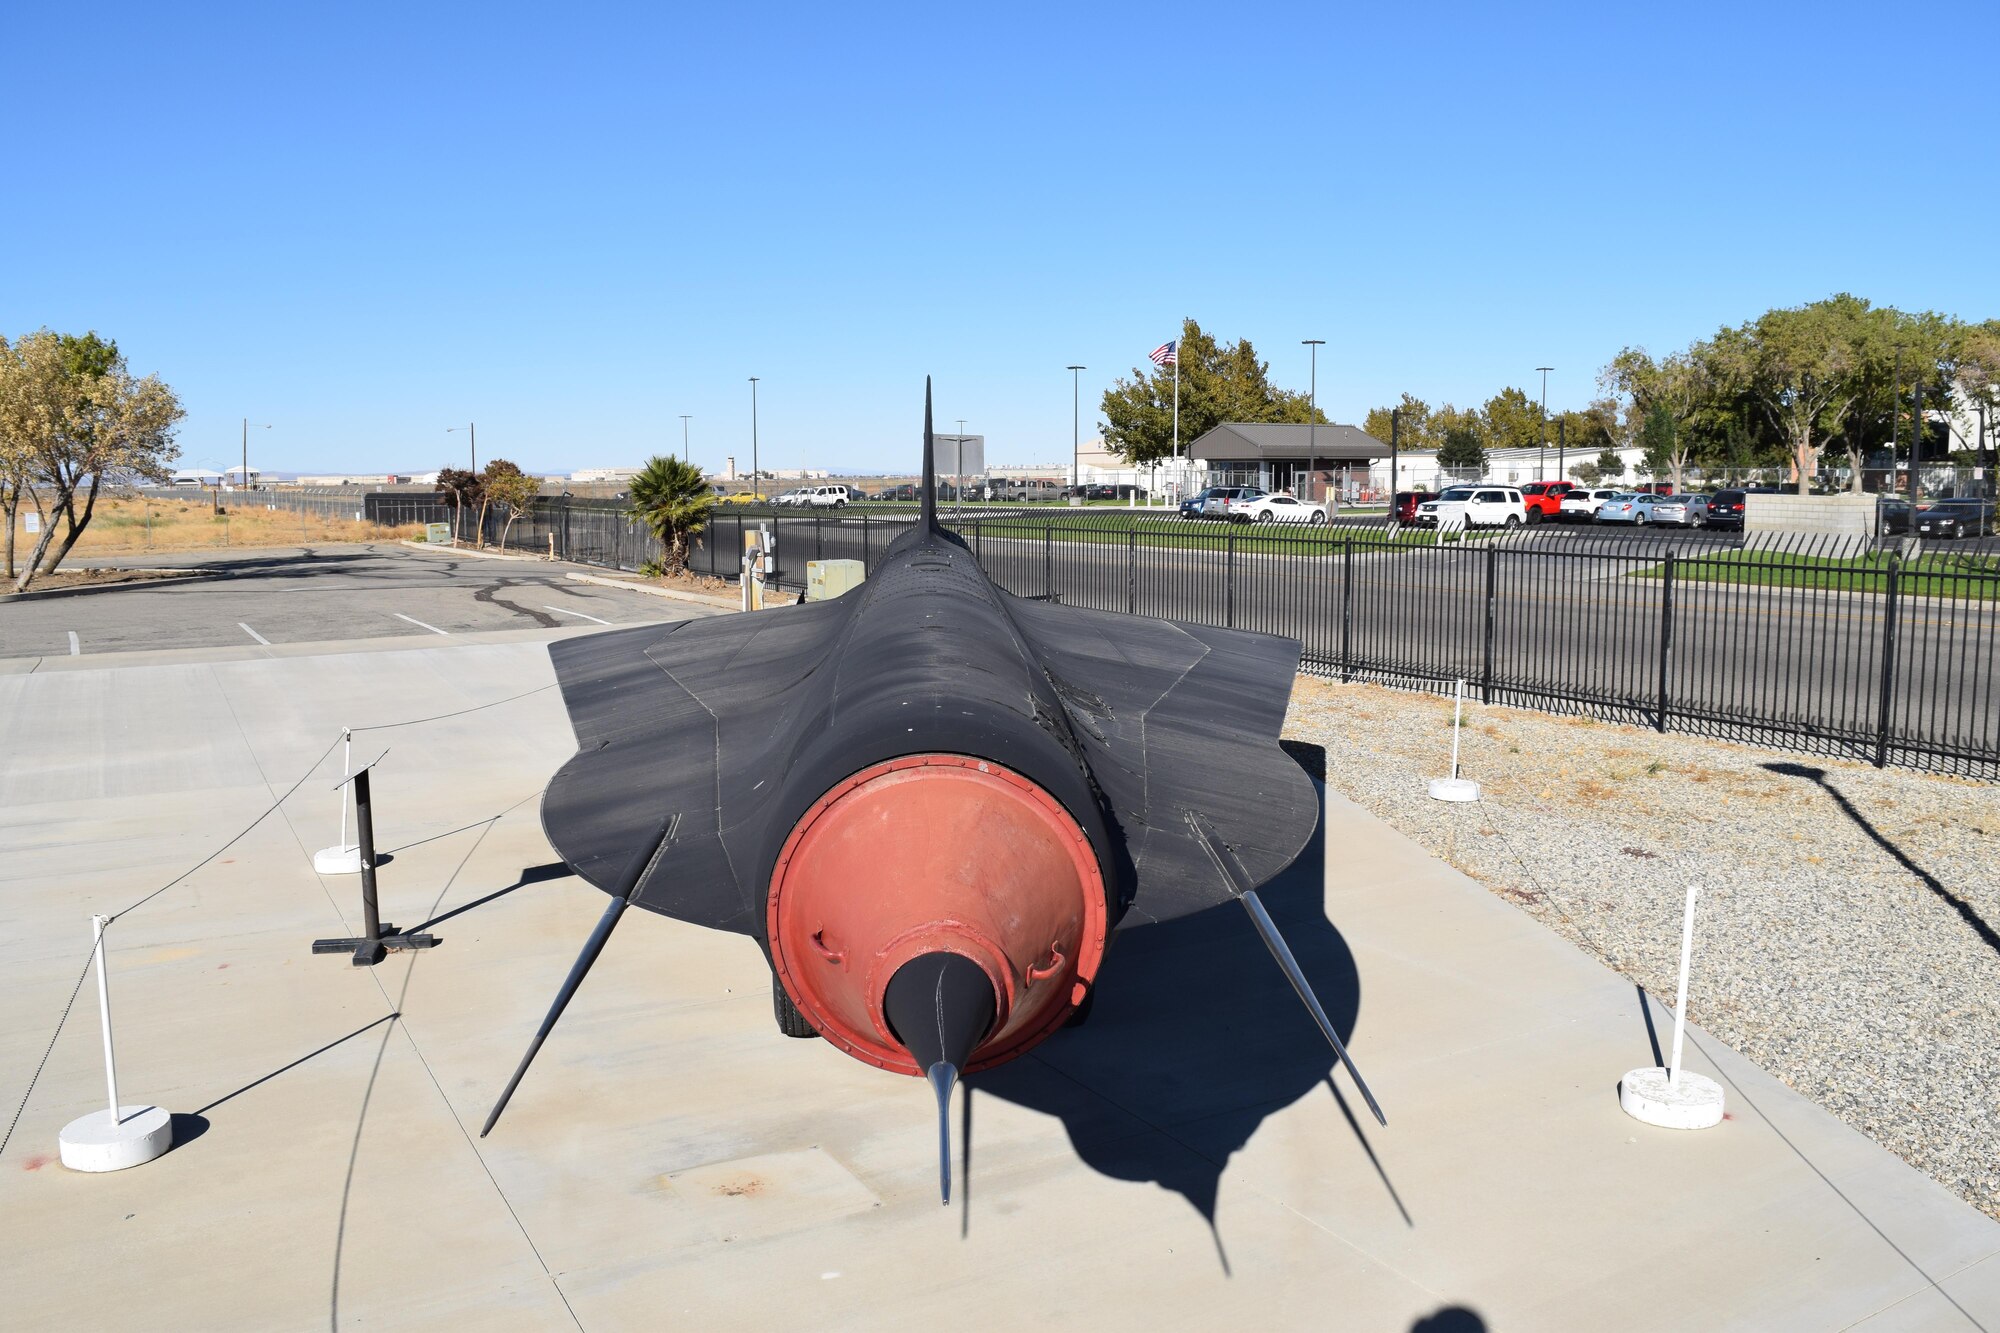 Nose art pays tribute to B-52’s top secret past